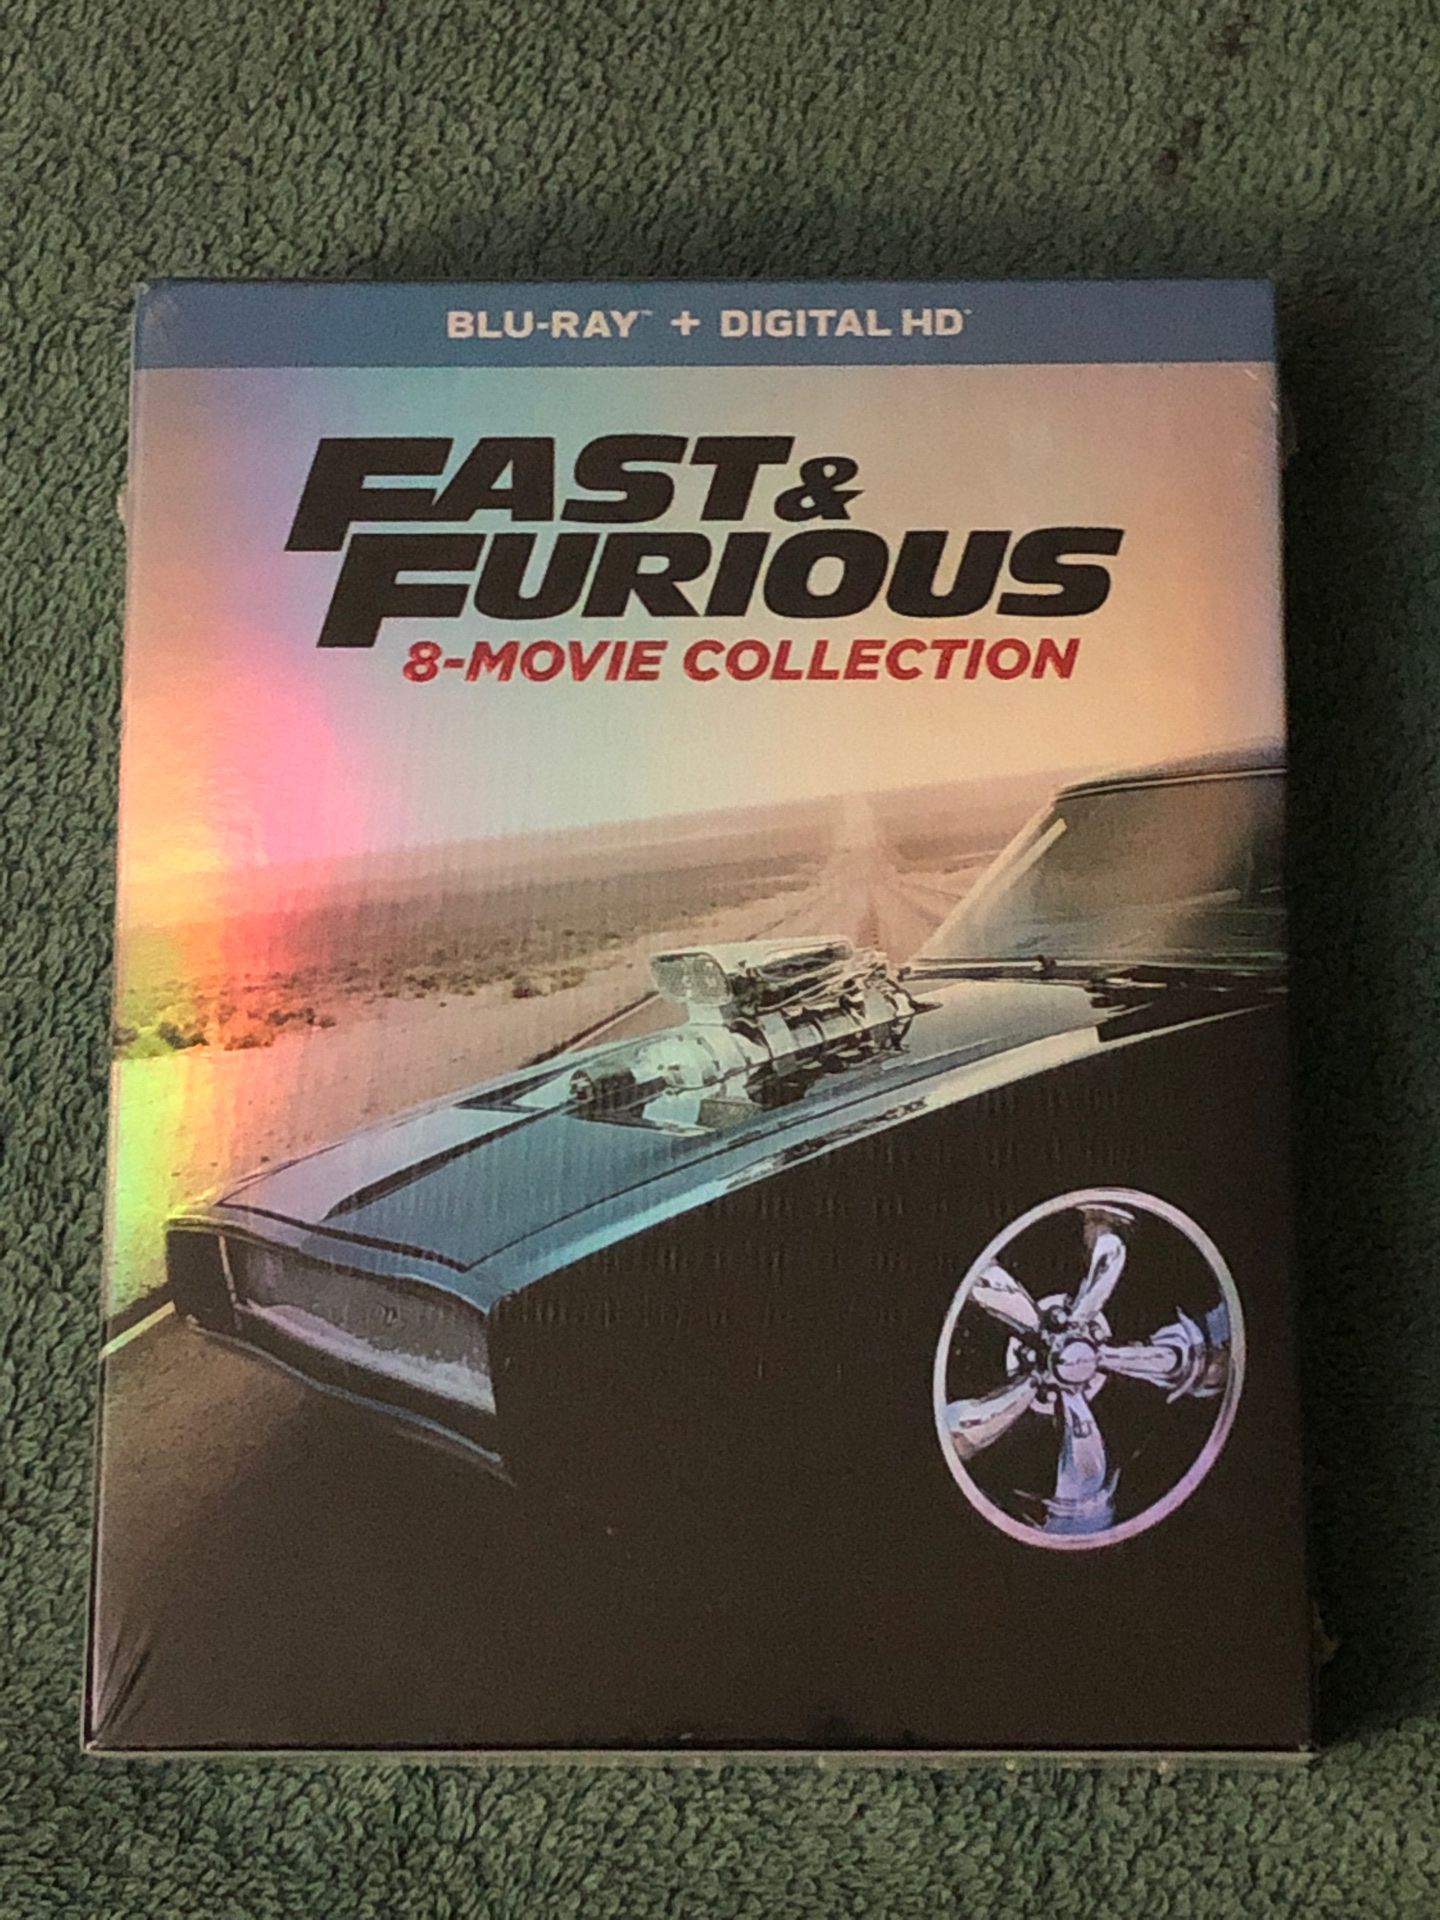 FAST & FURIOUS 8-MOVIE COLLECTION BLU-RAY + DIGITAL SEALED